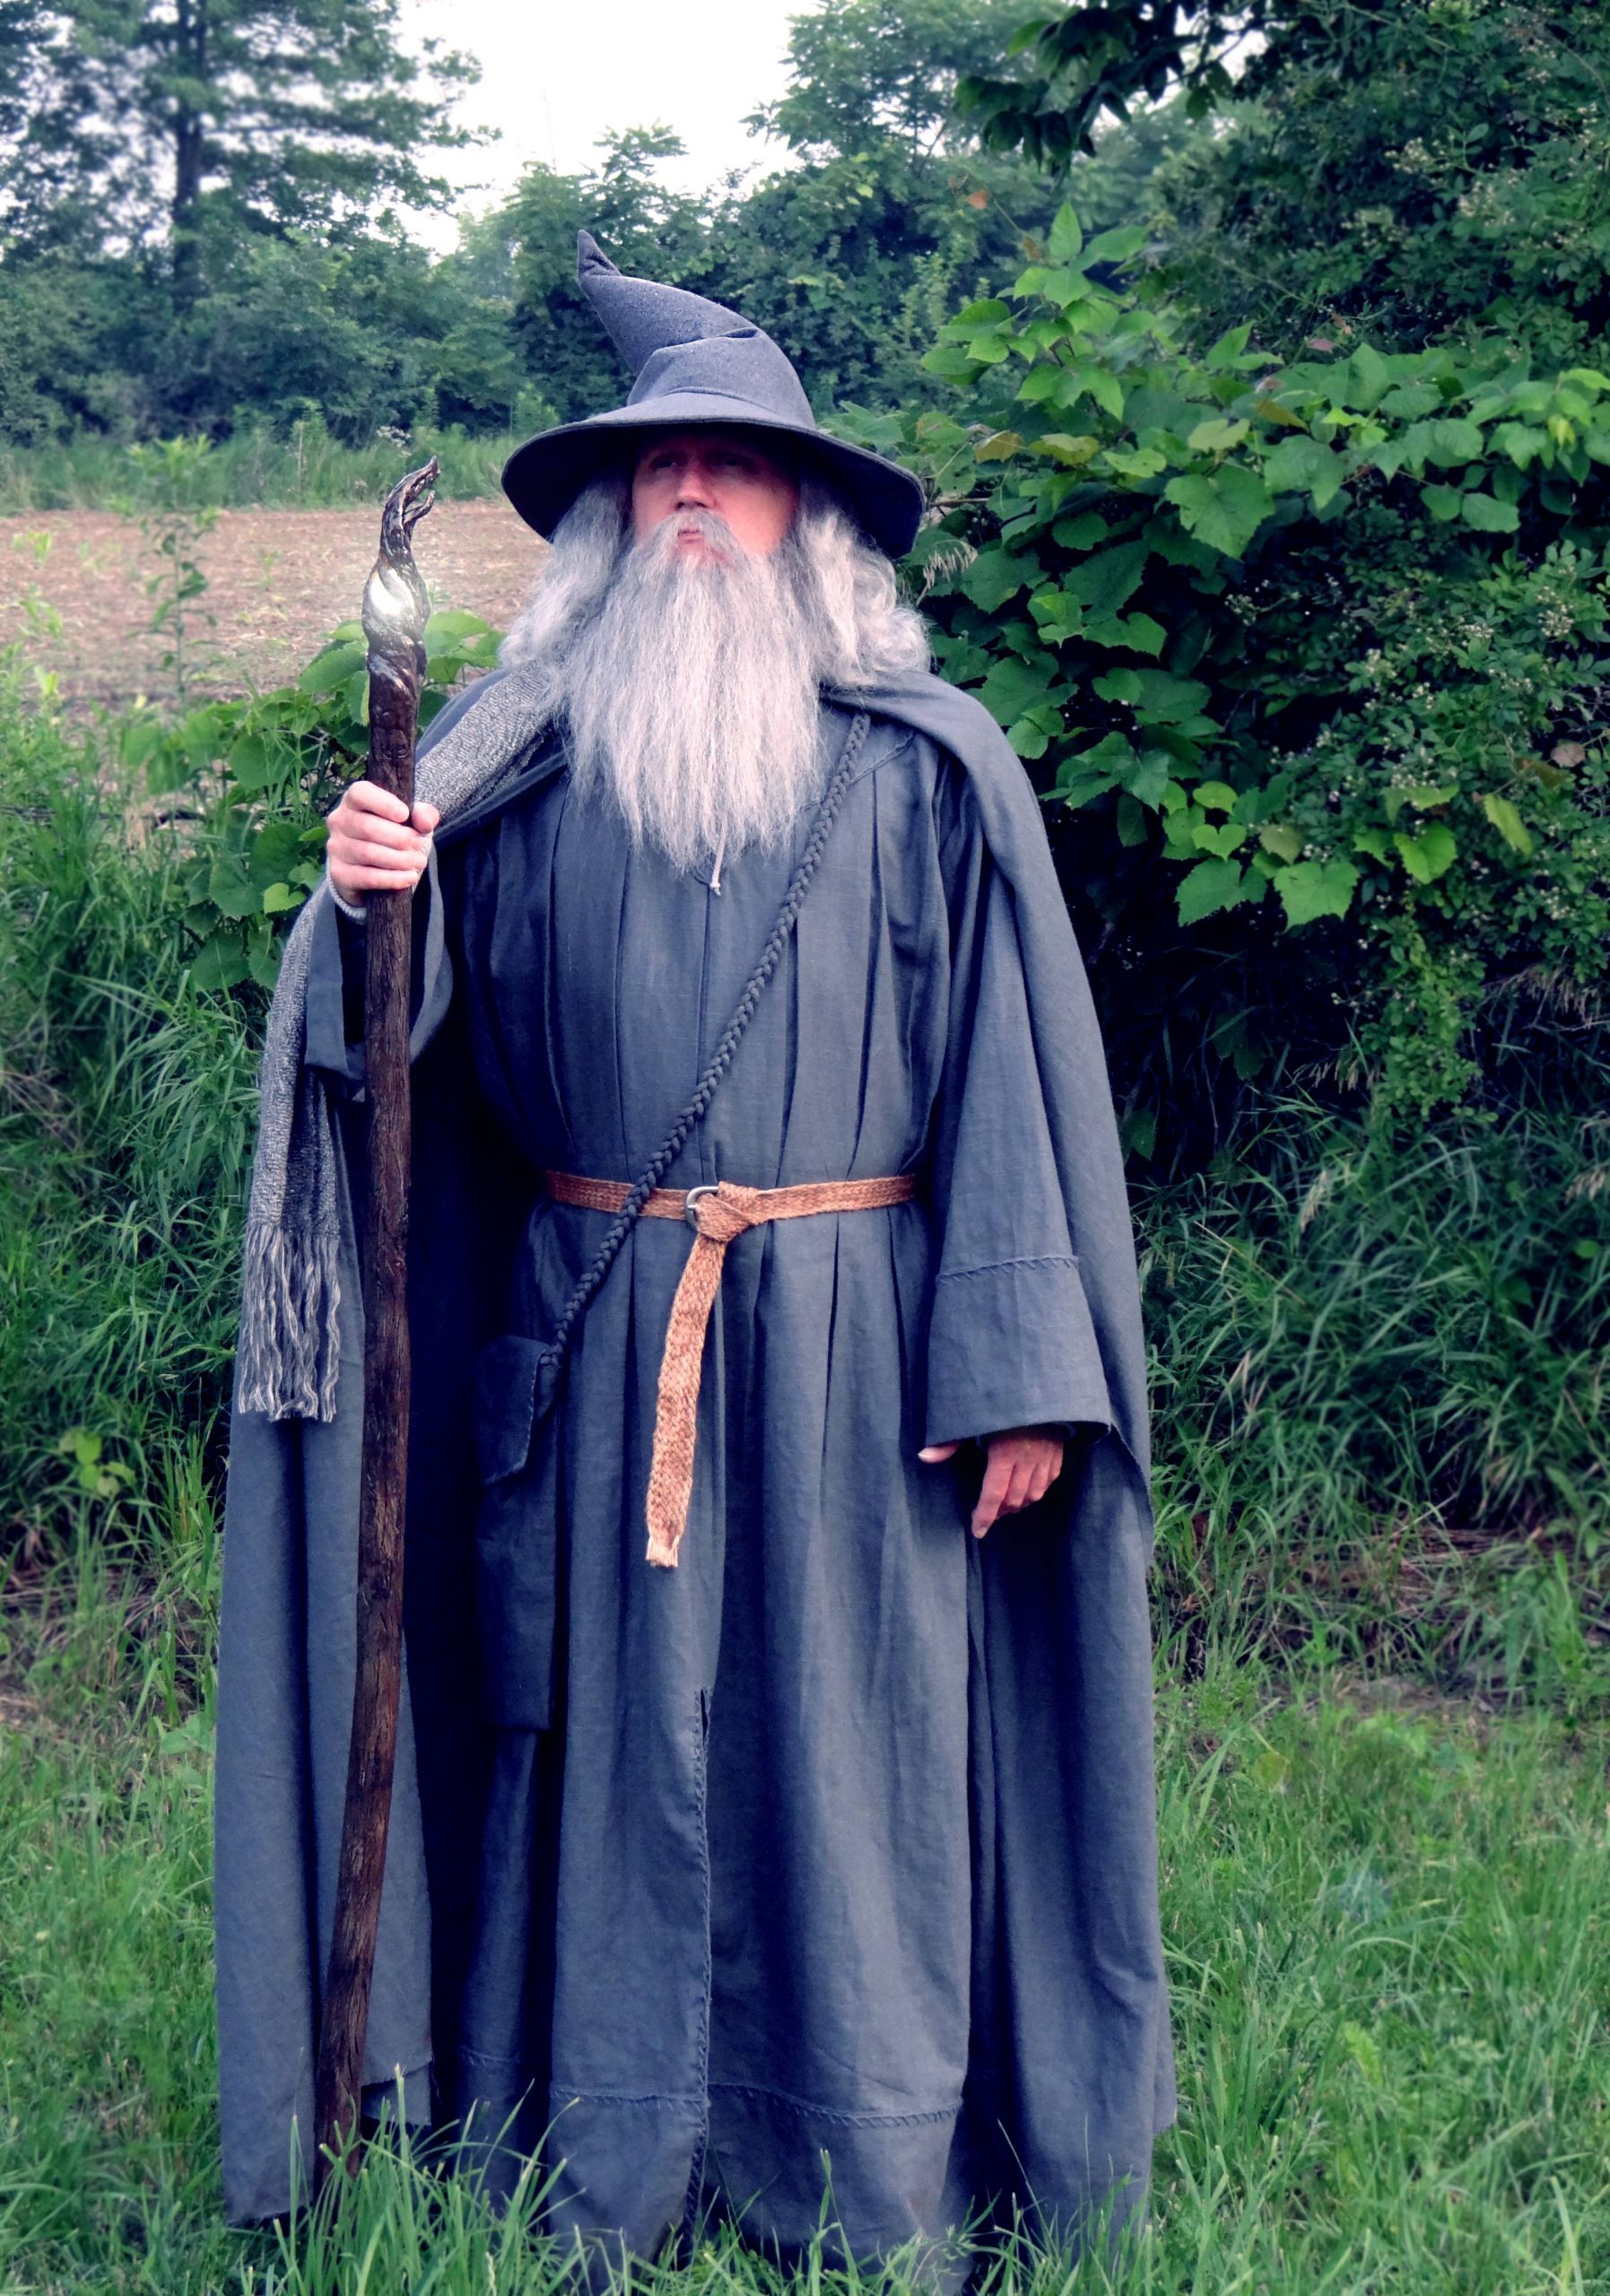 Gandalf Costume DIY
 Just finished our Gandalf cosplay lotr